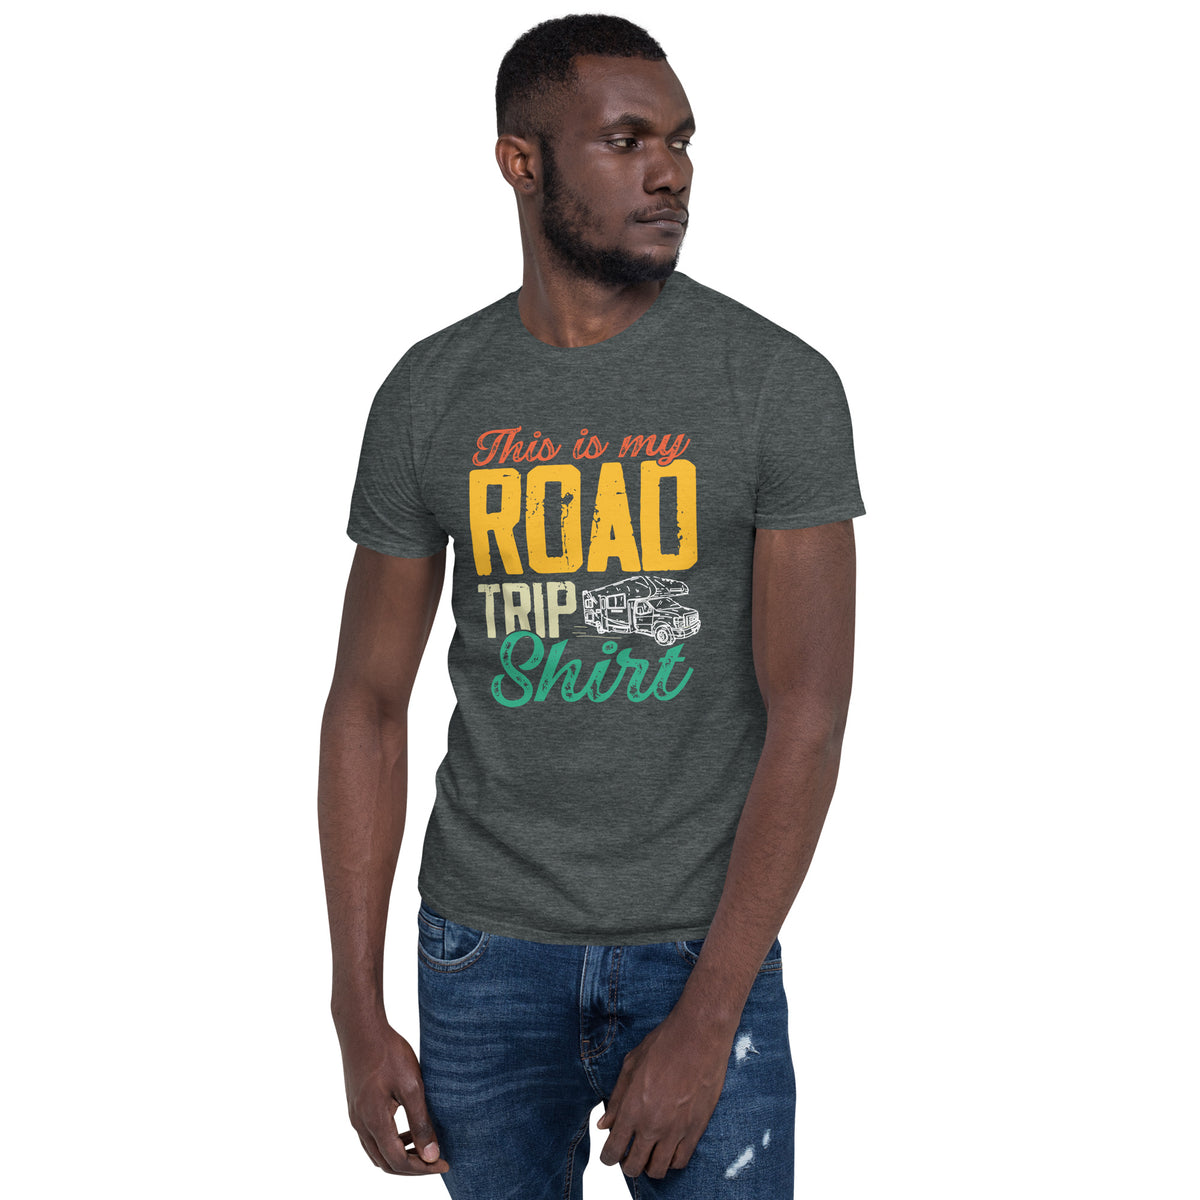 Cooles Herren Spruch Shirt "This is my Road Trip"